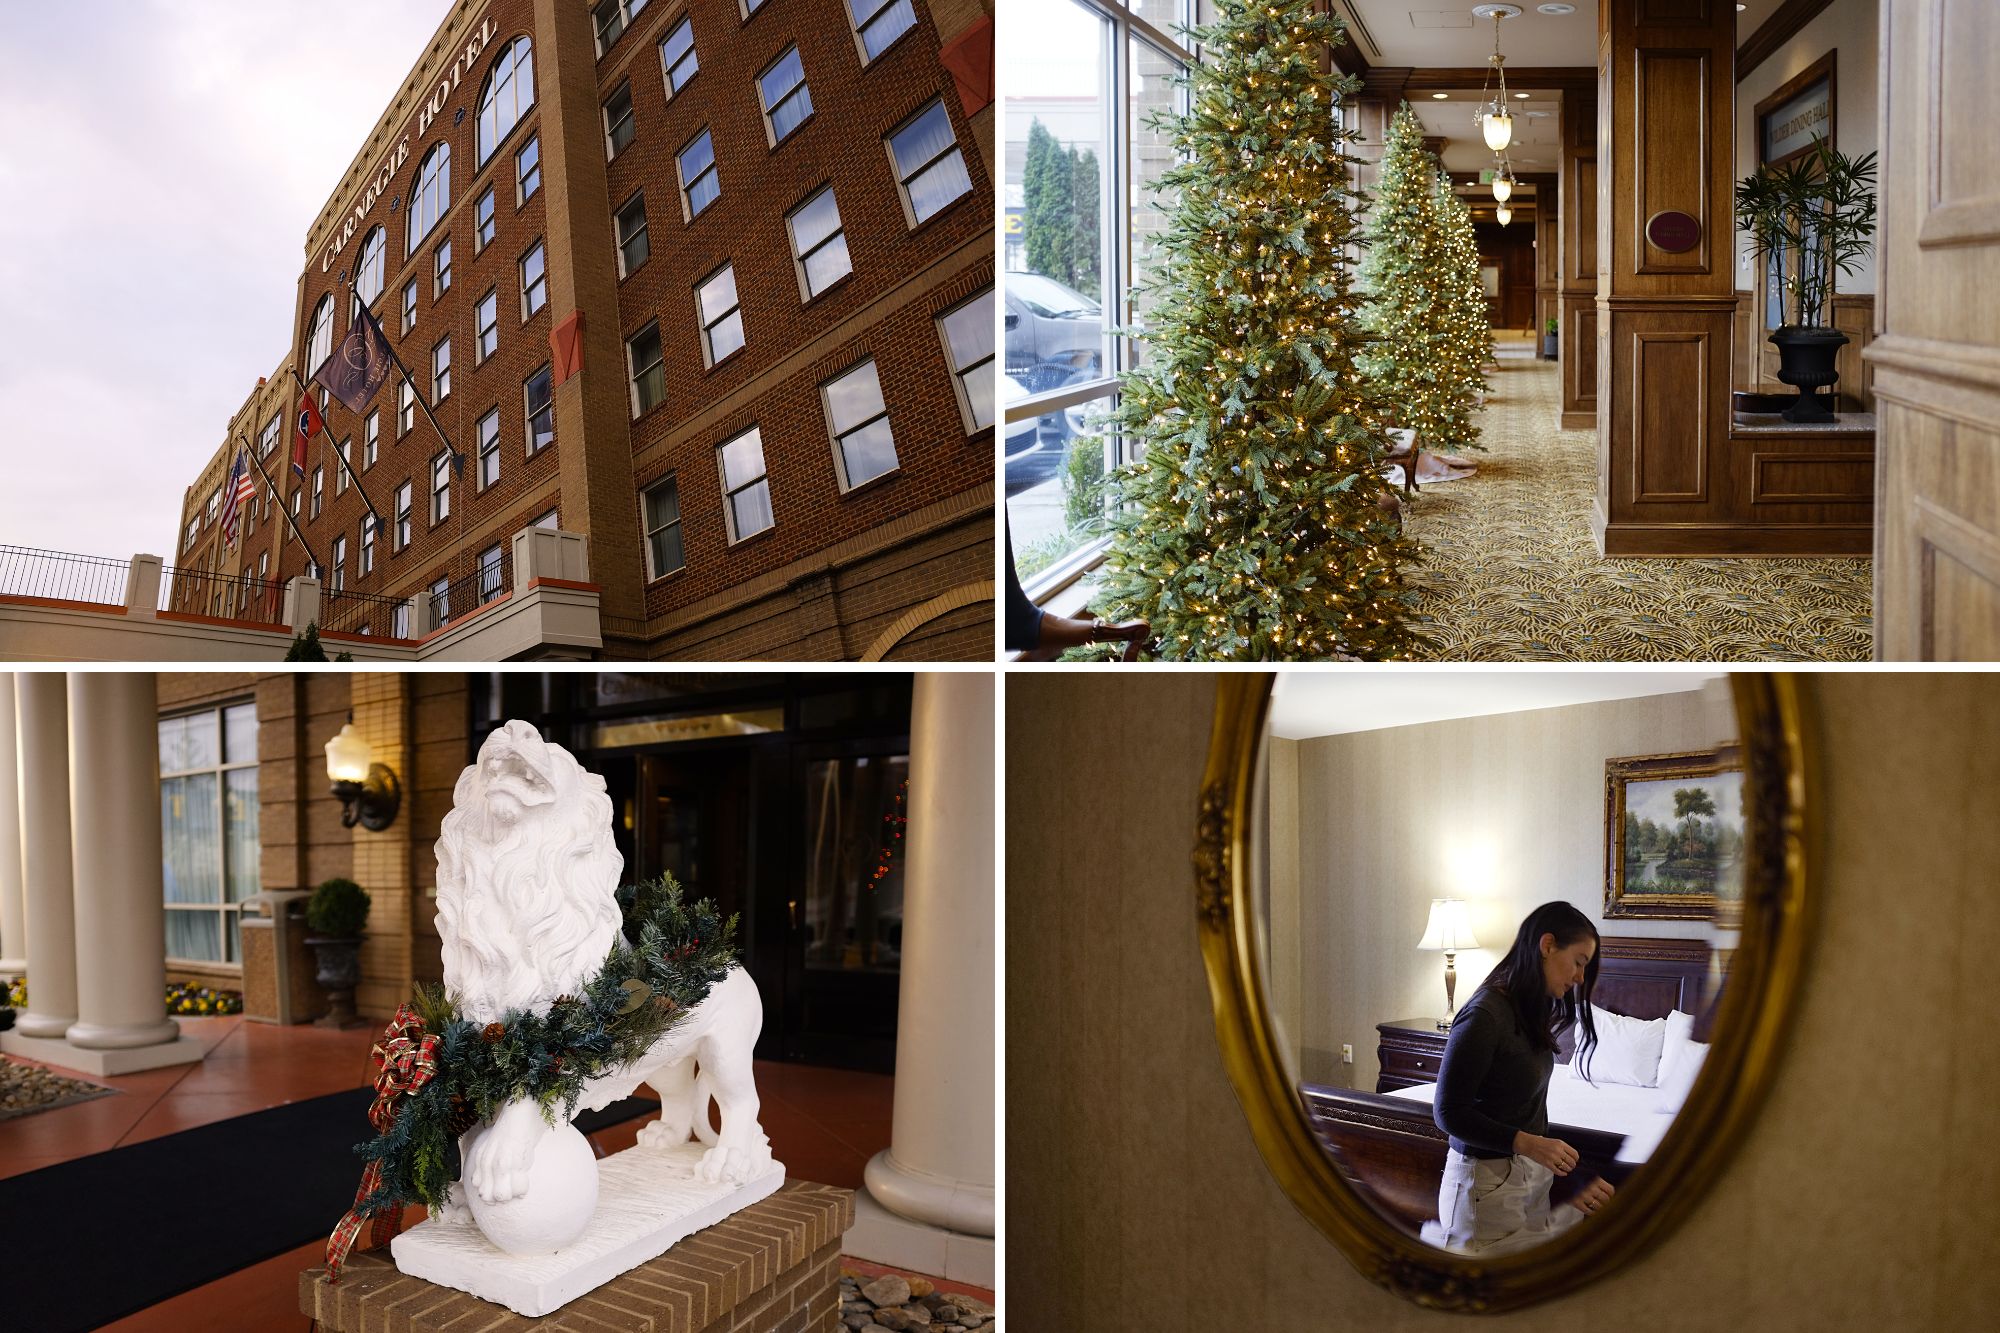 Carnegie Hotel Images: exterior, interior with Christmas trees, a lion with a wreath, and Alyssa in the room